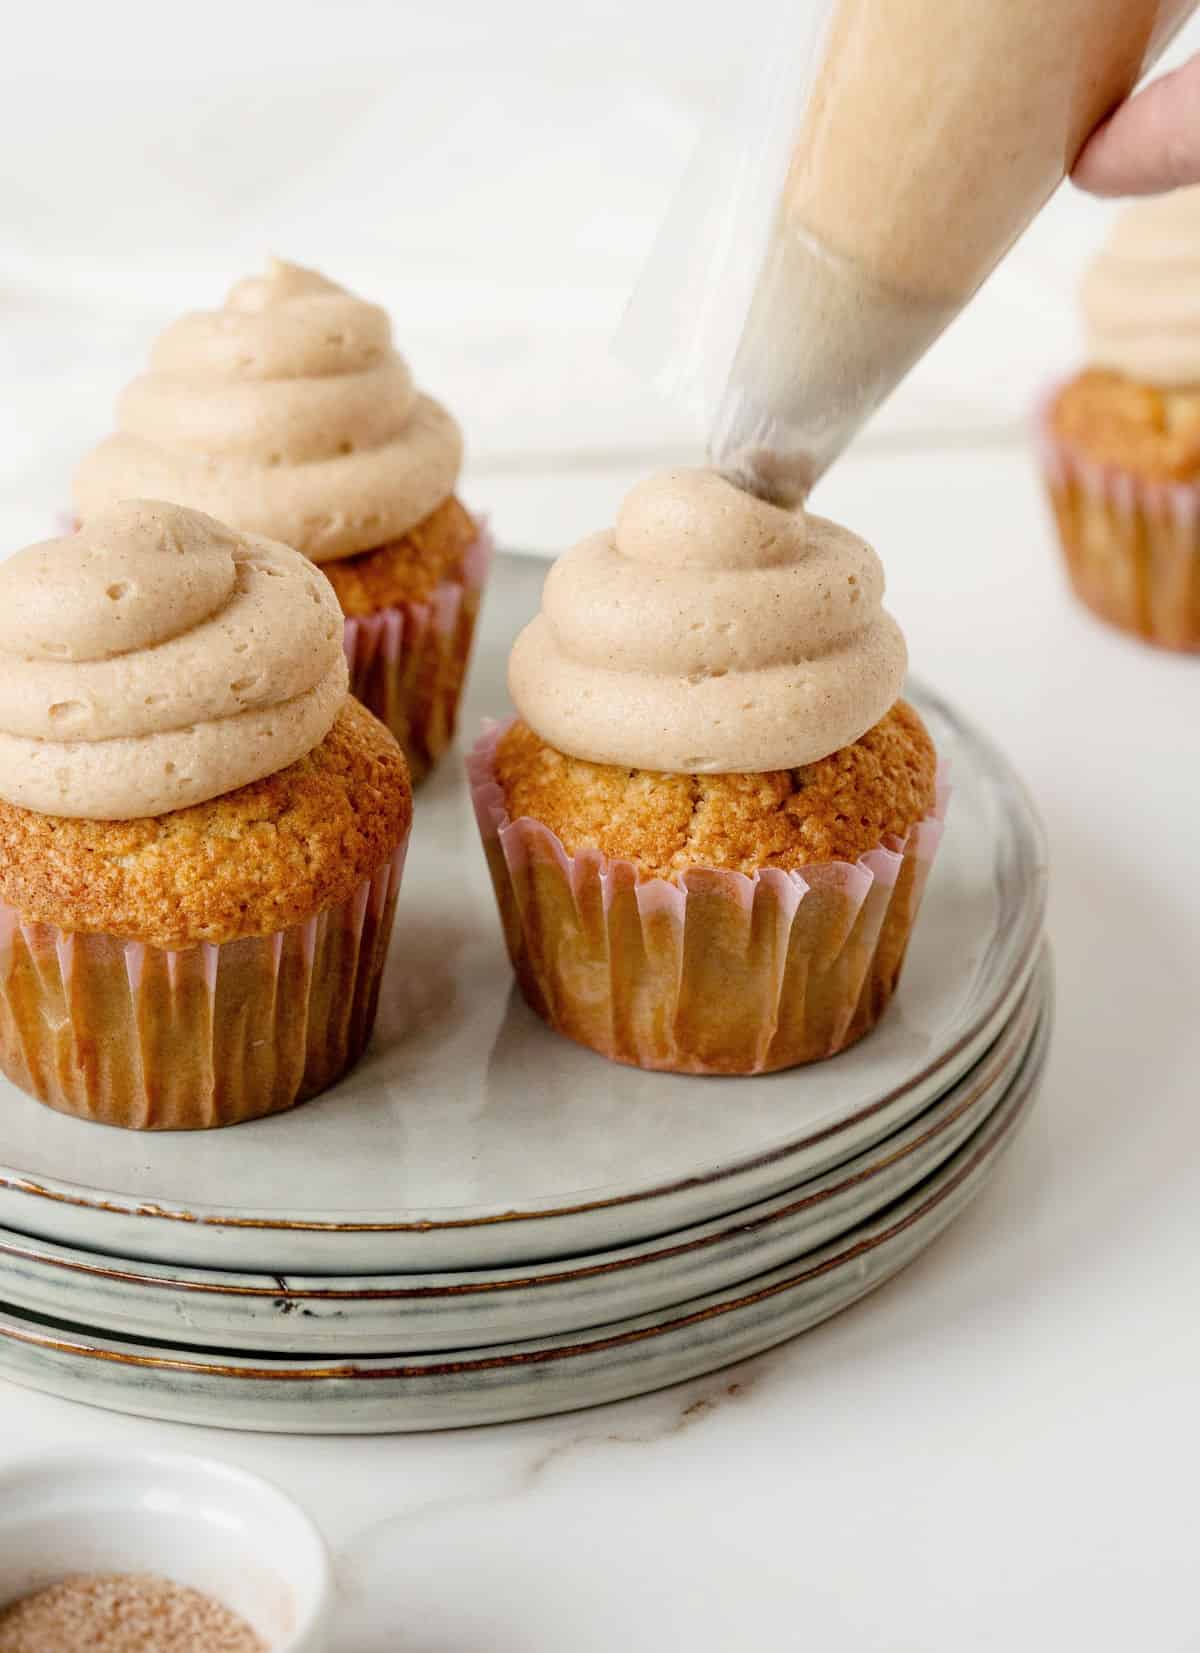 Using a piping bag to frost cinnamon cupcakes in paper liners on a stack of grey plates. White surface and background.